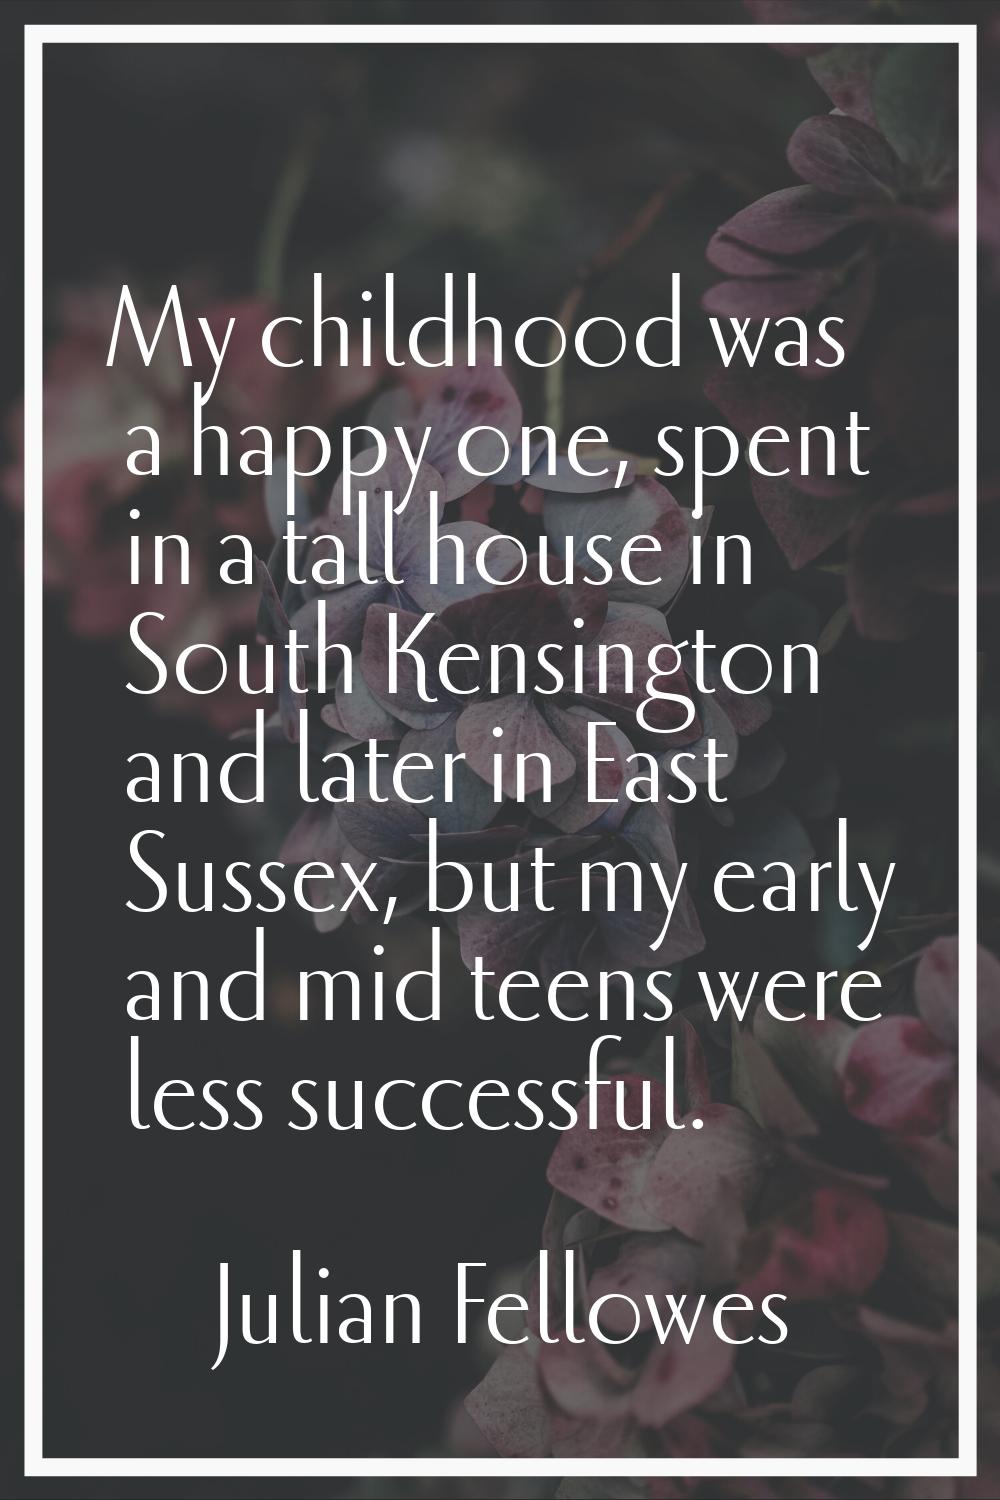 My childhood was a happy one, spent in a tall house in South Kensington and later in East Sussex, b